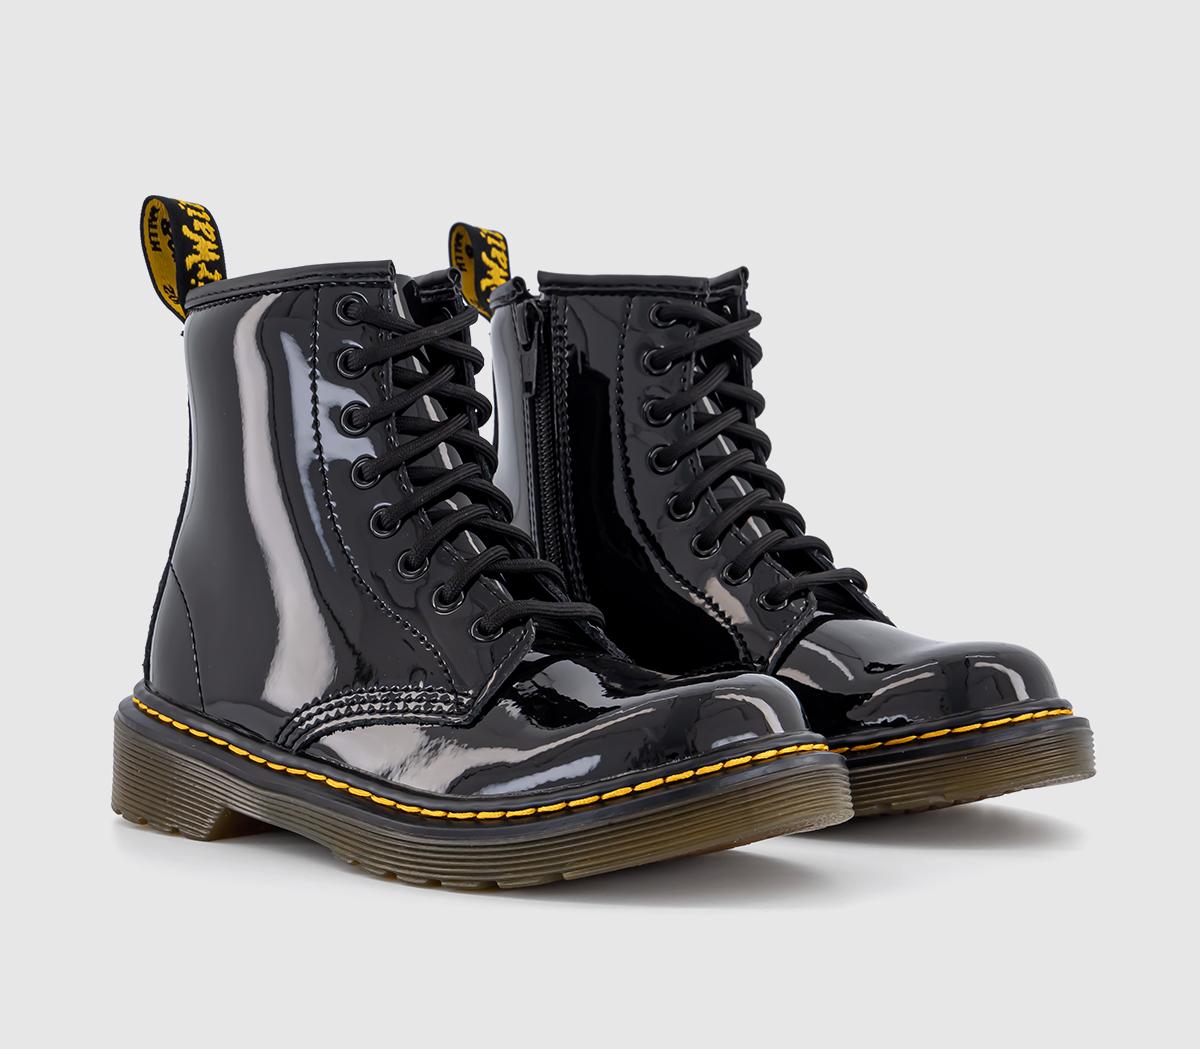 Dr. Martens 1460 Junior Boots Black Patent, 11 Youth